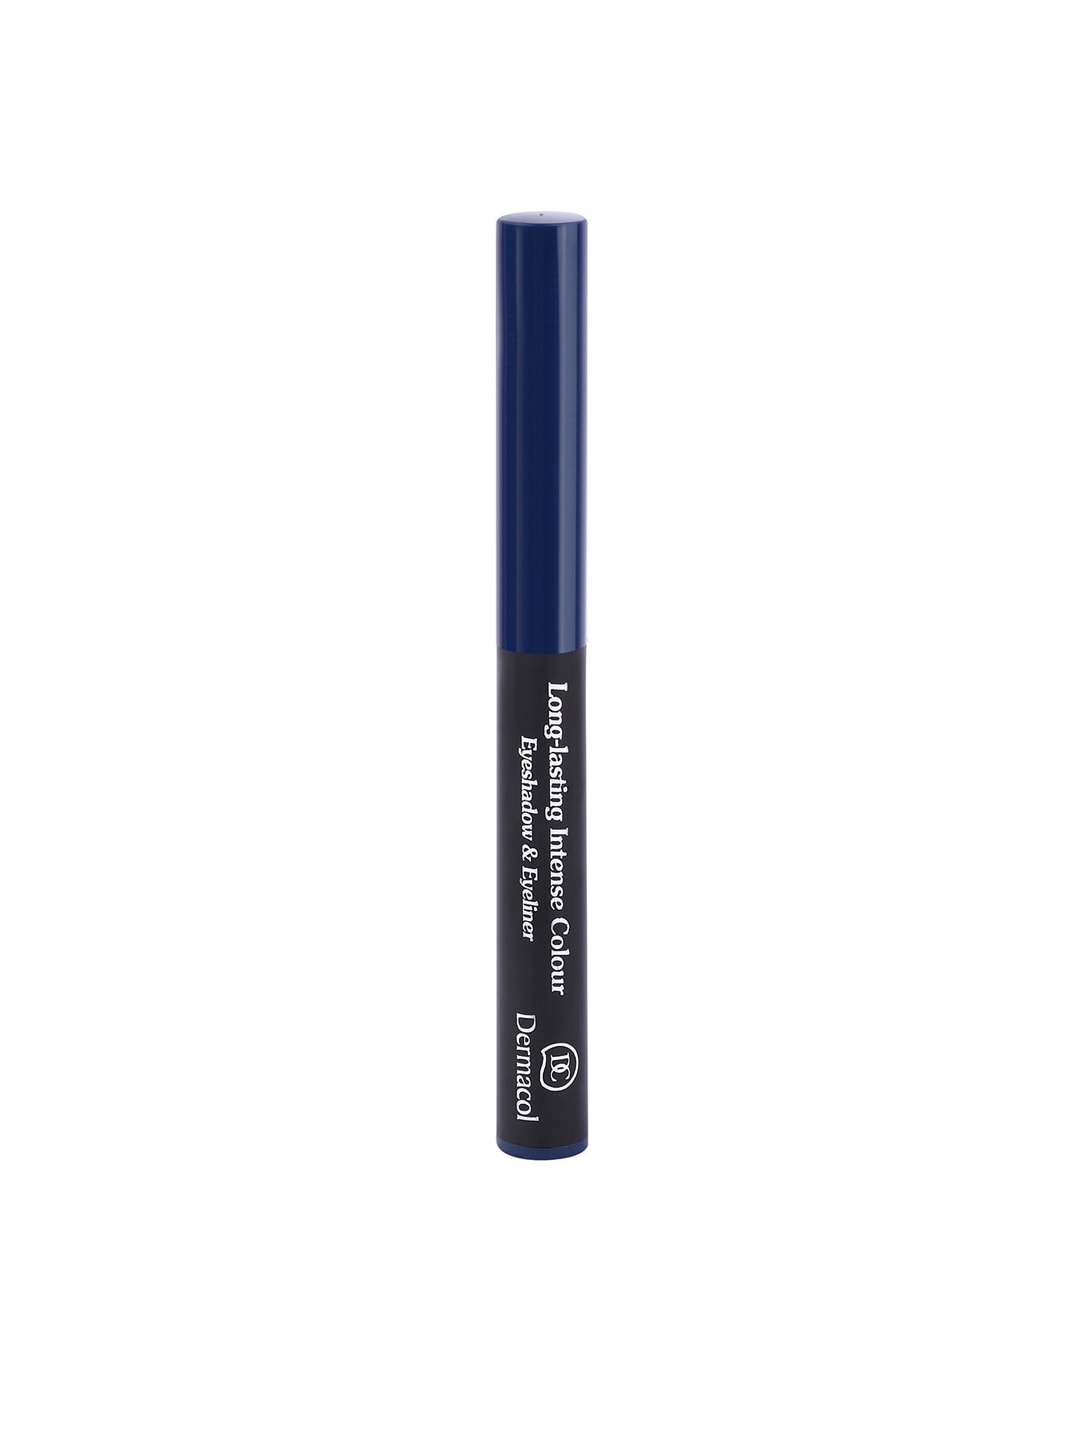 Dermacol Long-Lasting Intense Colour Eyeshadow Navy Blue No.5 - 1.6 g Price in India